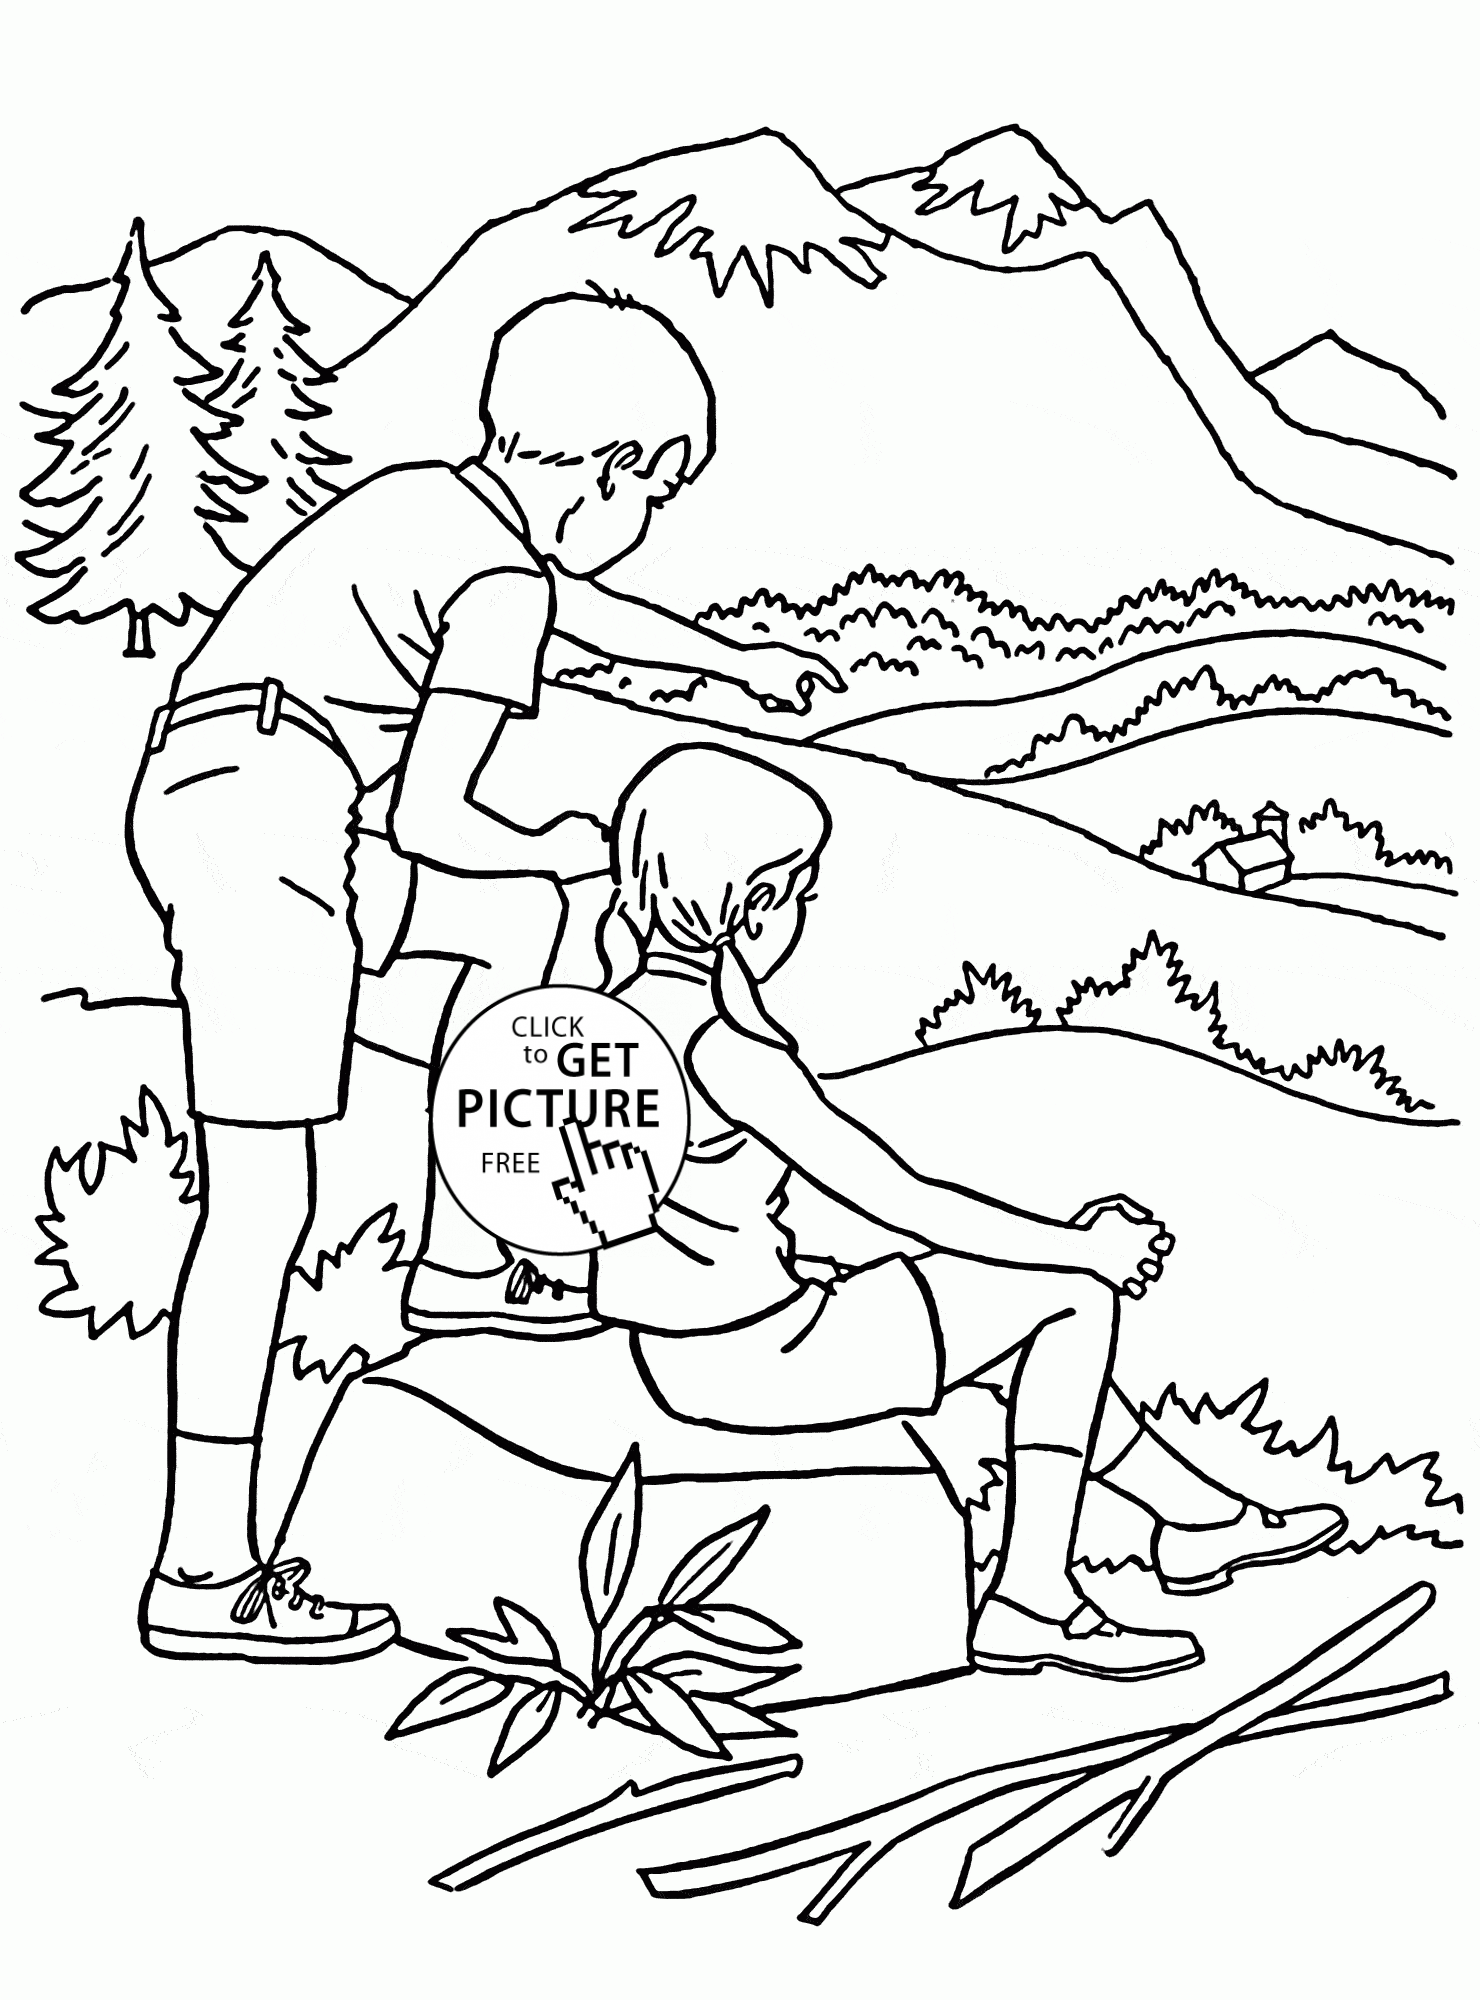 coloring page for kids hiking - Clip Art Library